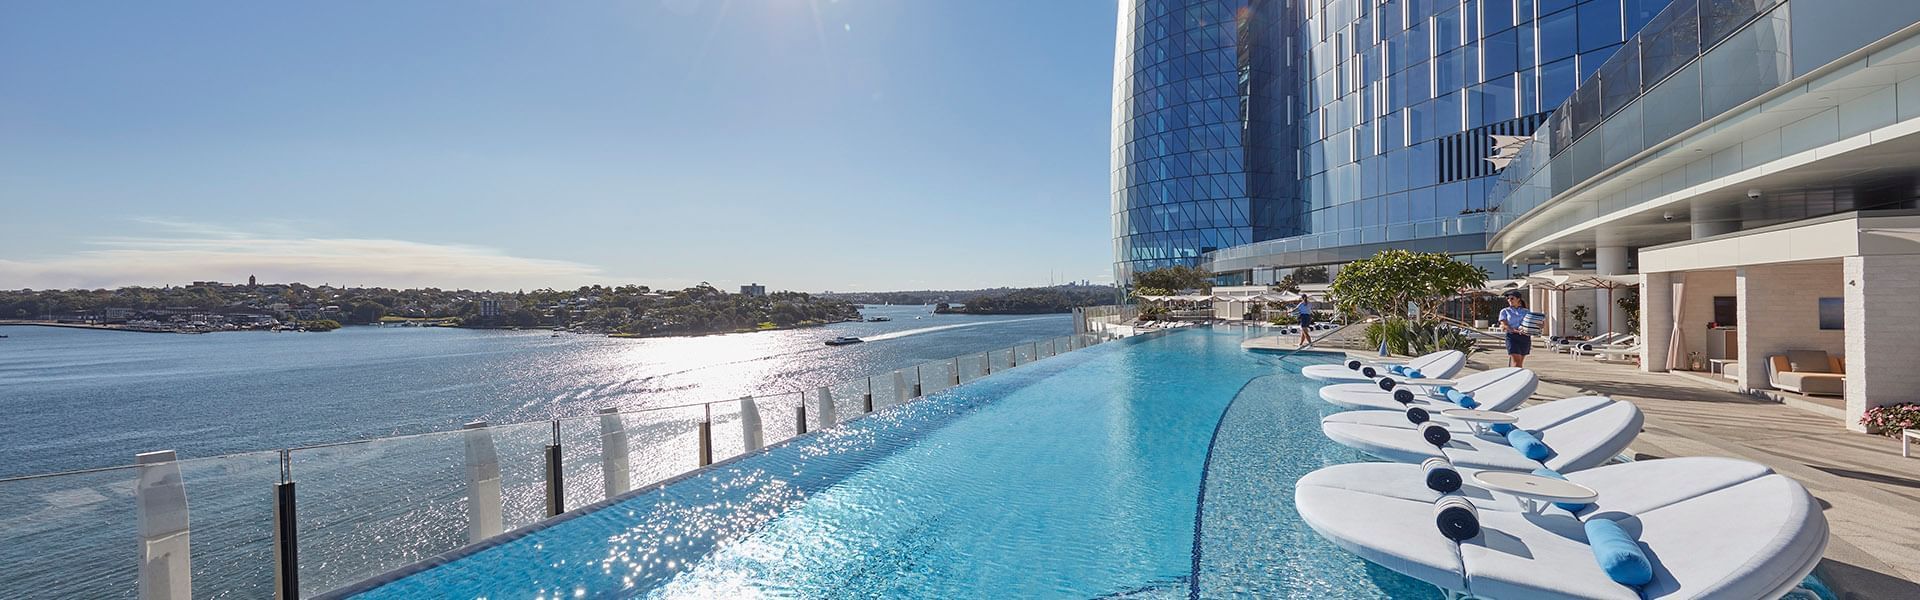 Outdoor pool with sun beds at Crown Promenade Melbourne